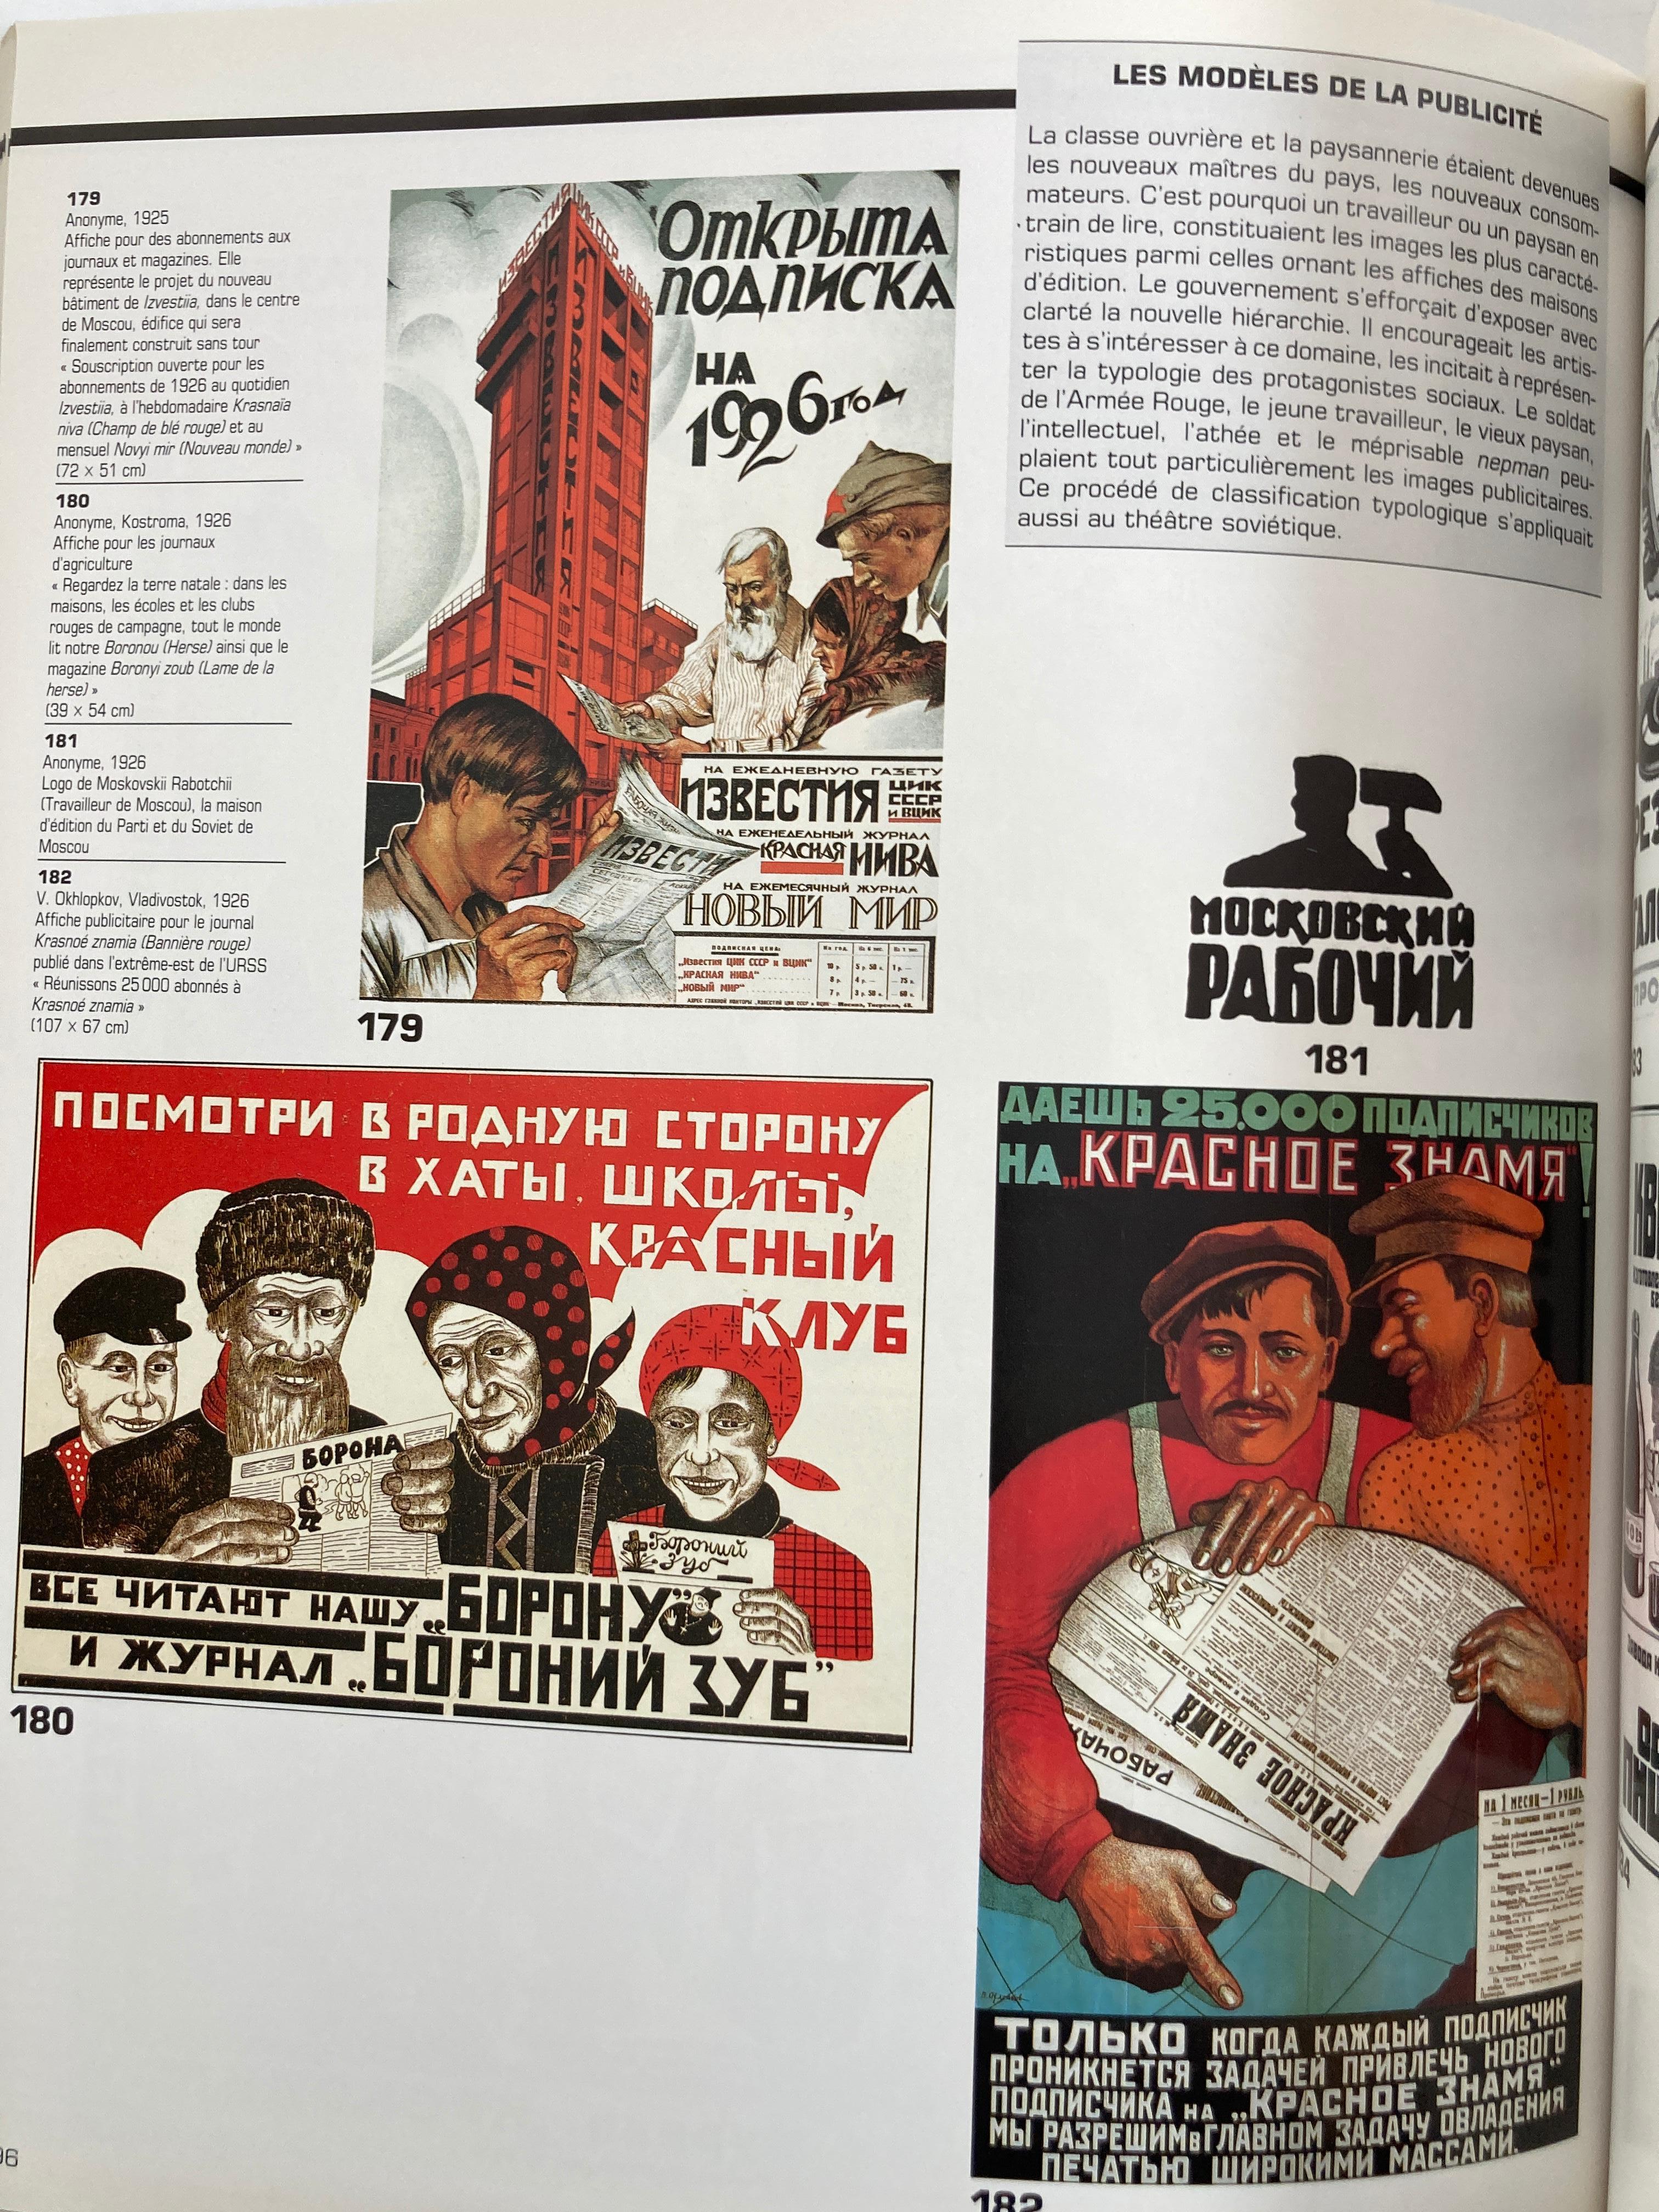 Paper Advertising in the USSR in the 1920s, La Pub in URSS French Book For Sale